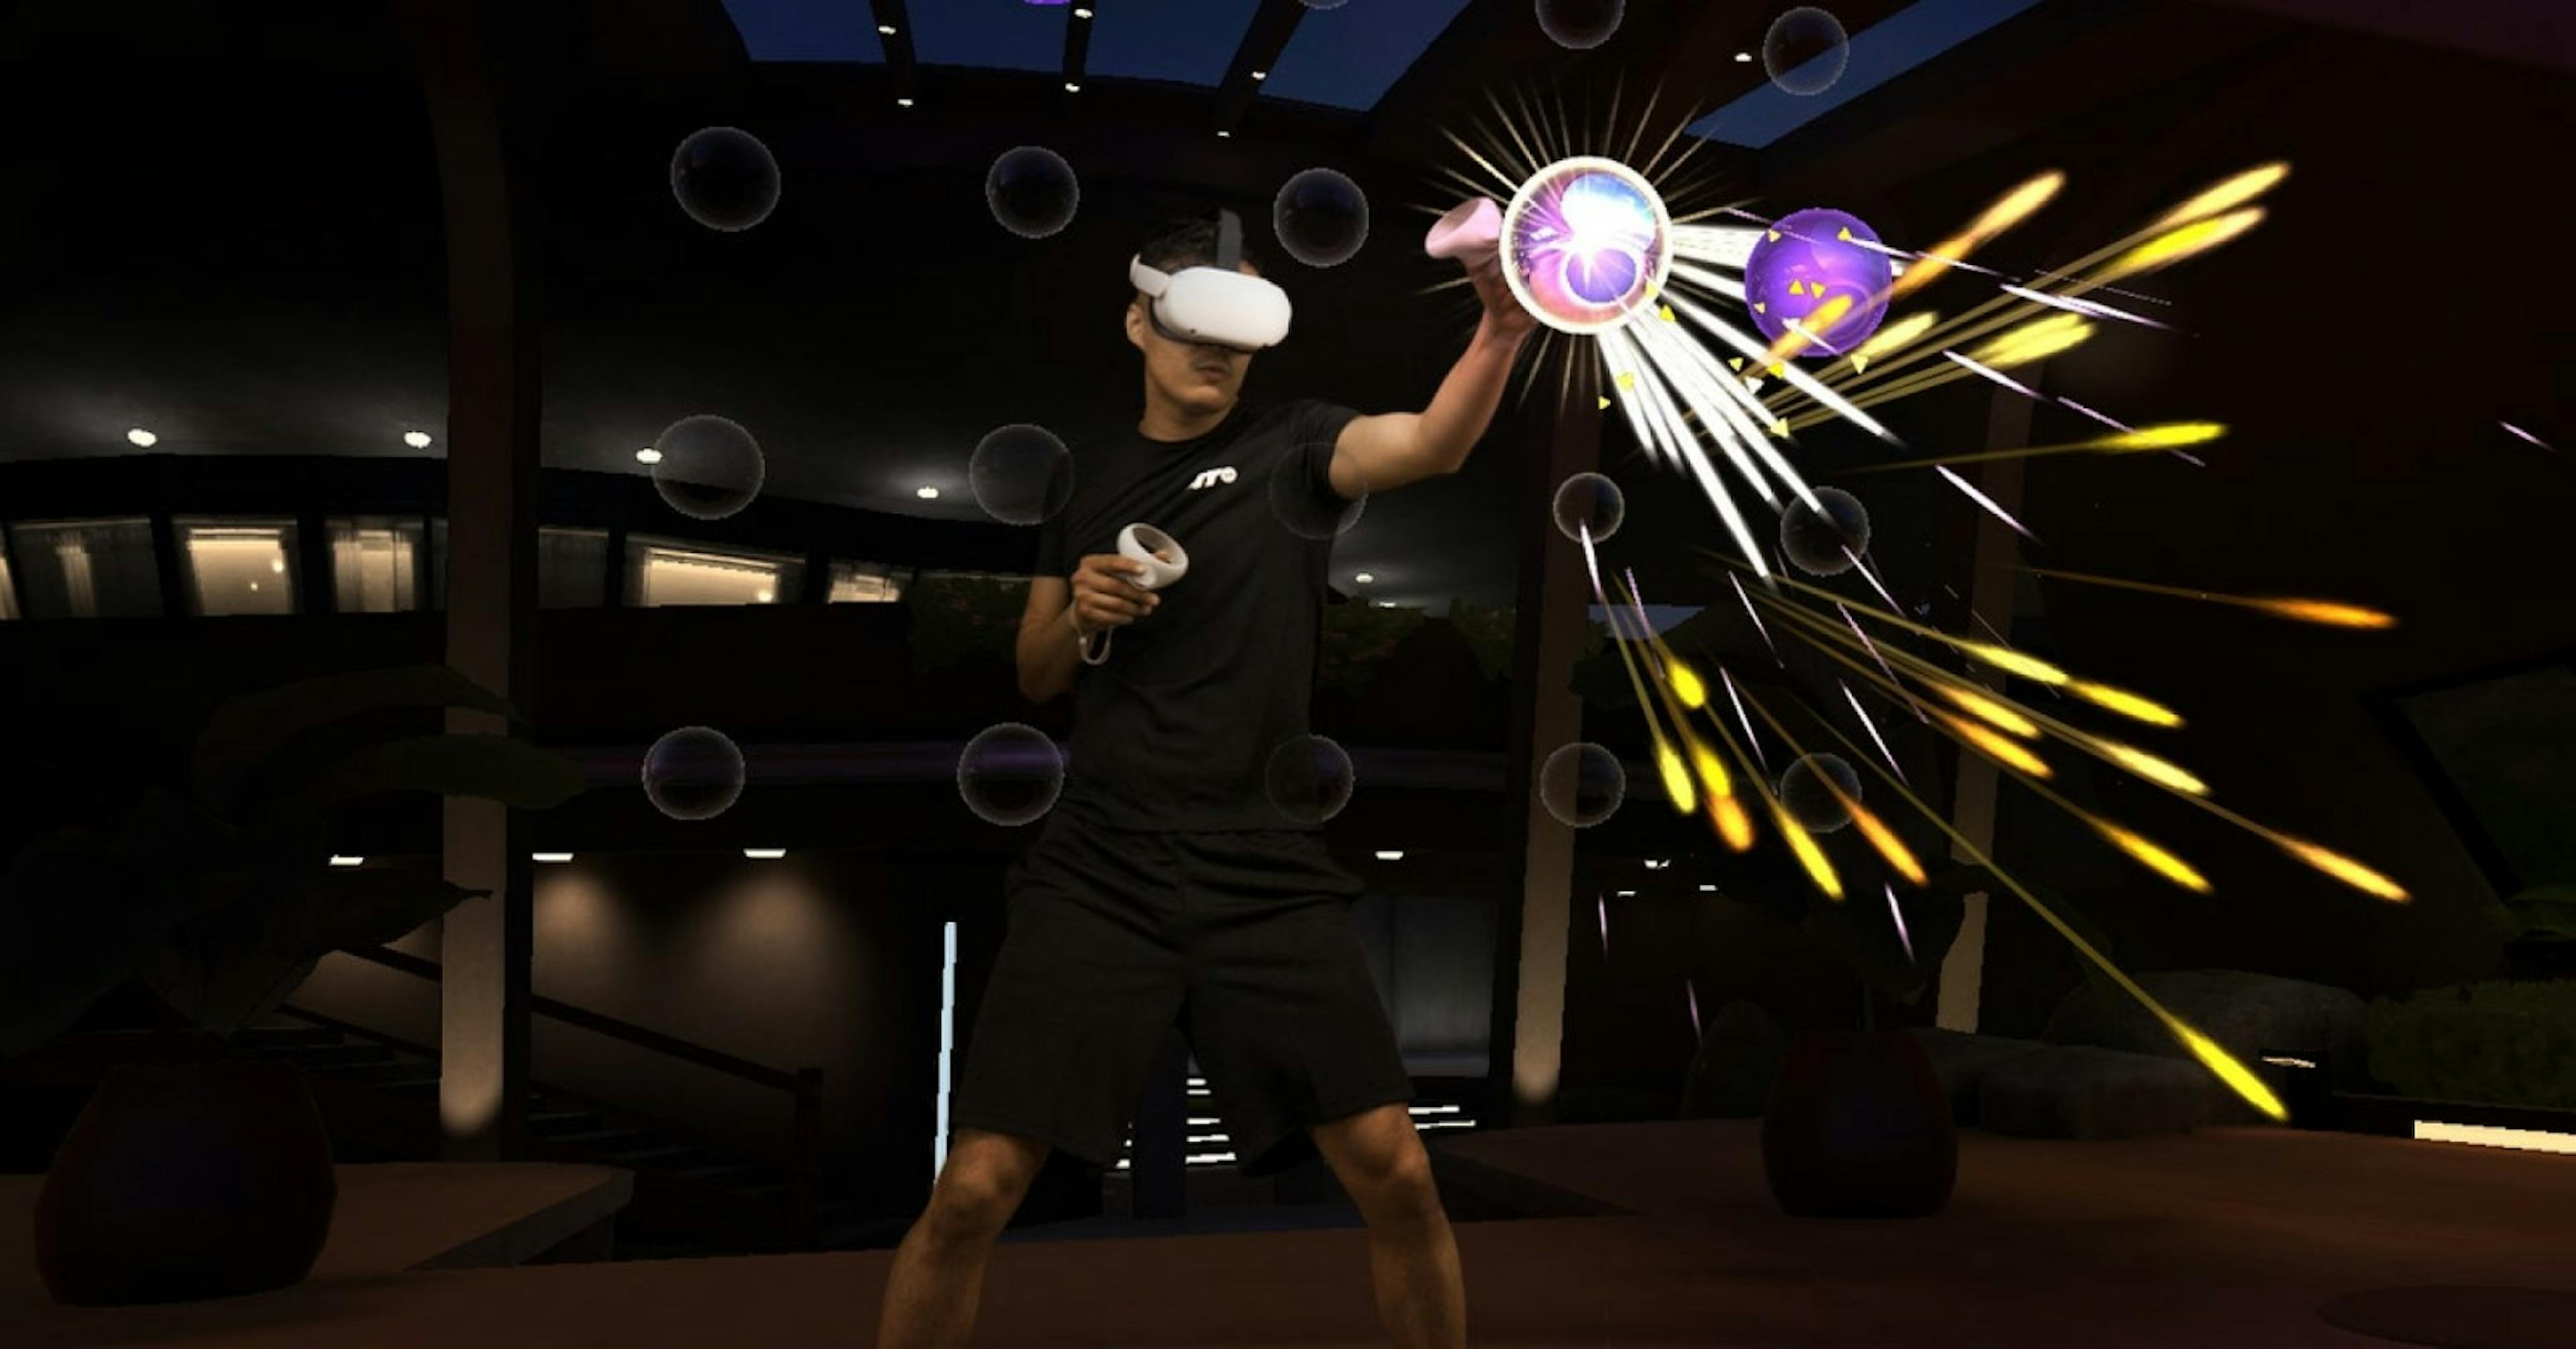 Playing games will be more immersive in the Metaverse